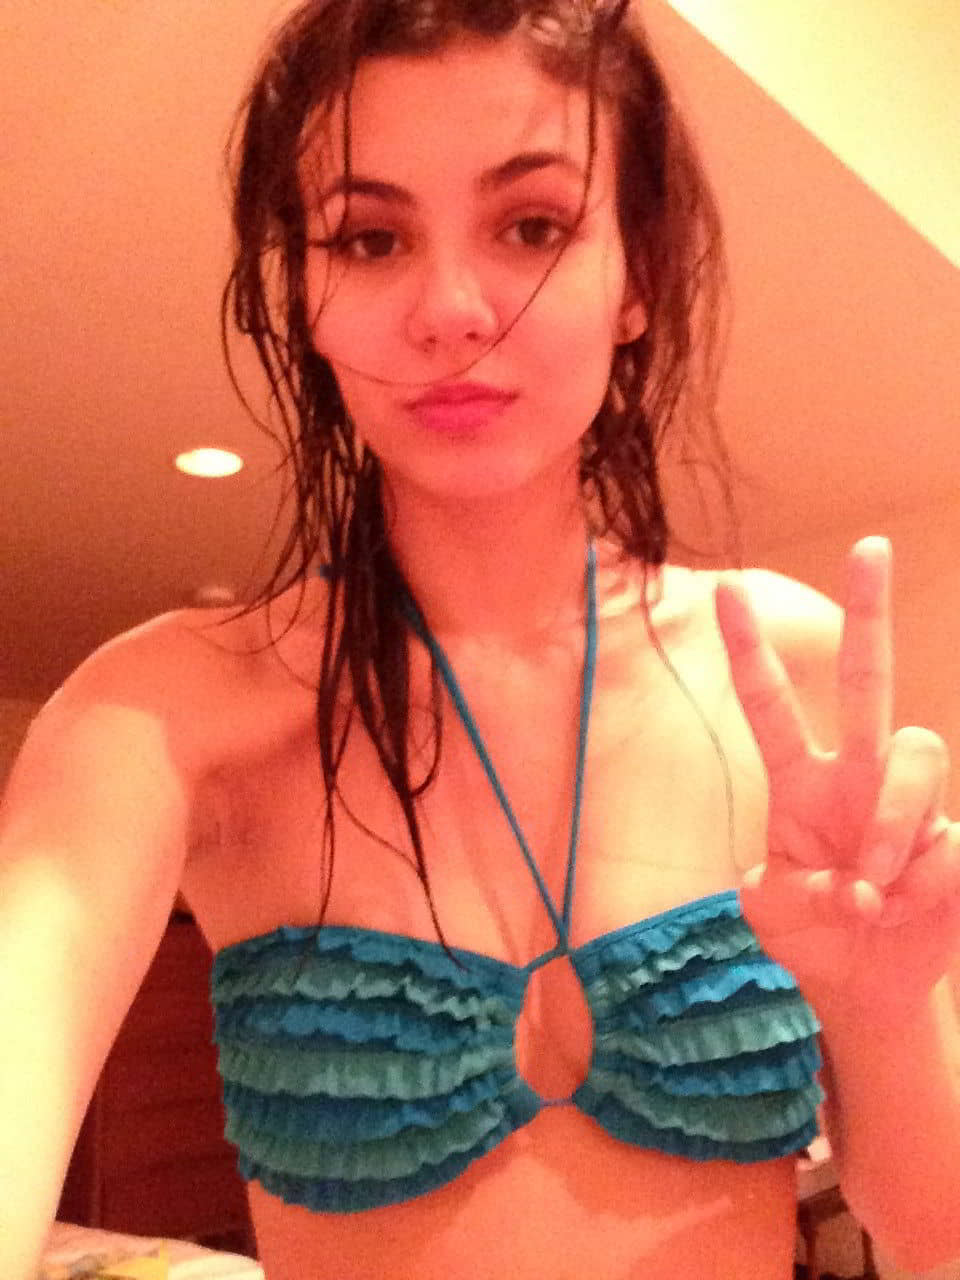 victoria-justice-leaked-cellphone-pictures-19.jpg